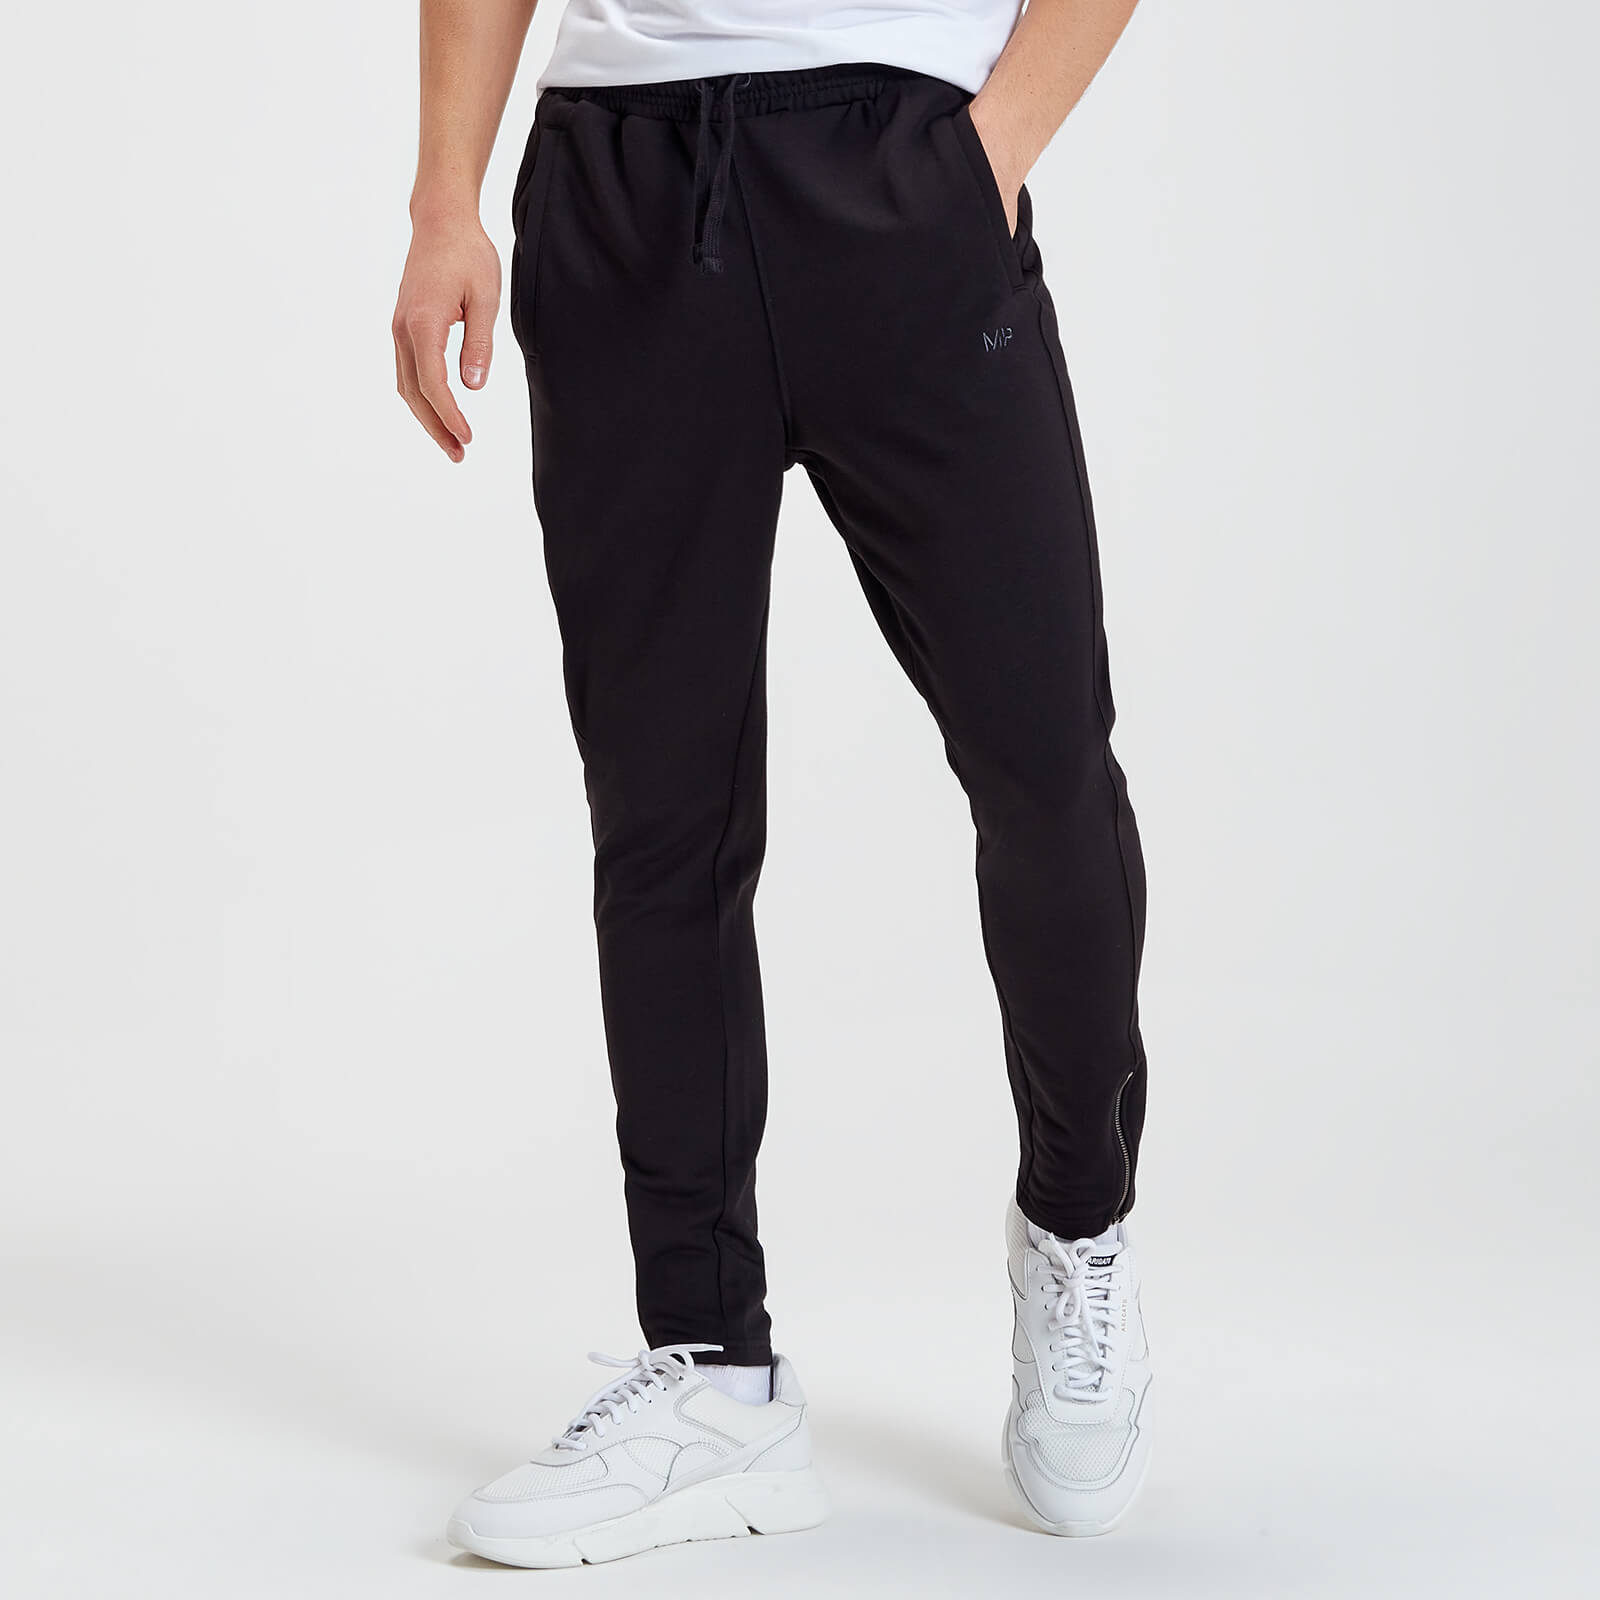 MP Men's Rest Day Joggers - Washed Black - XS